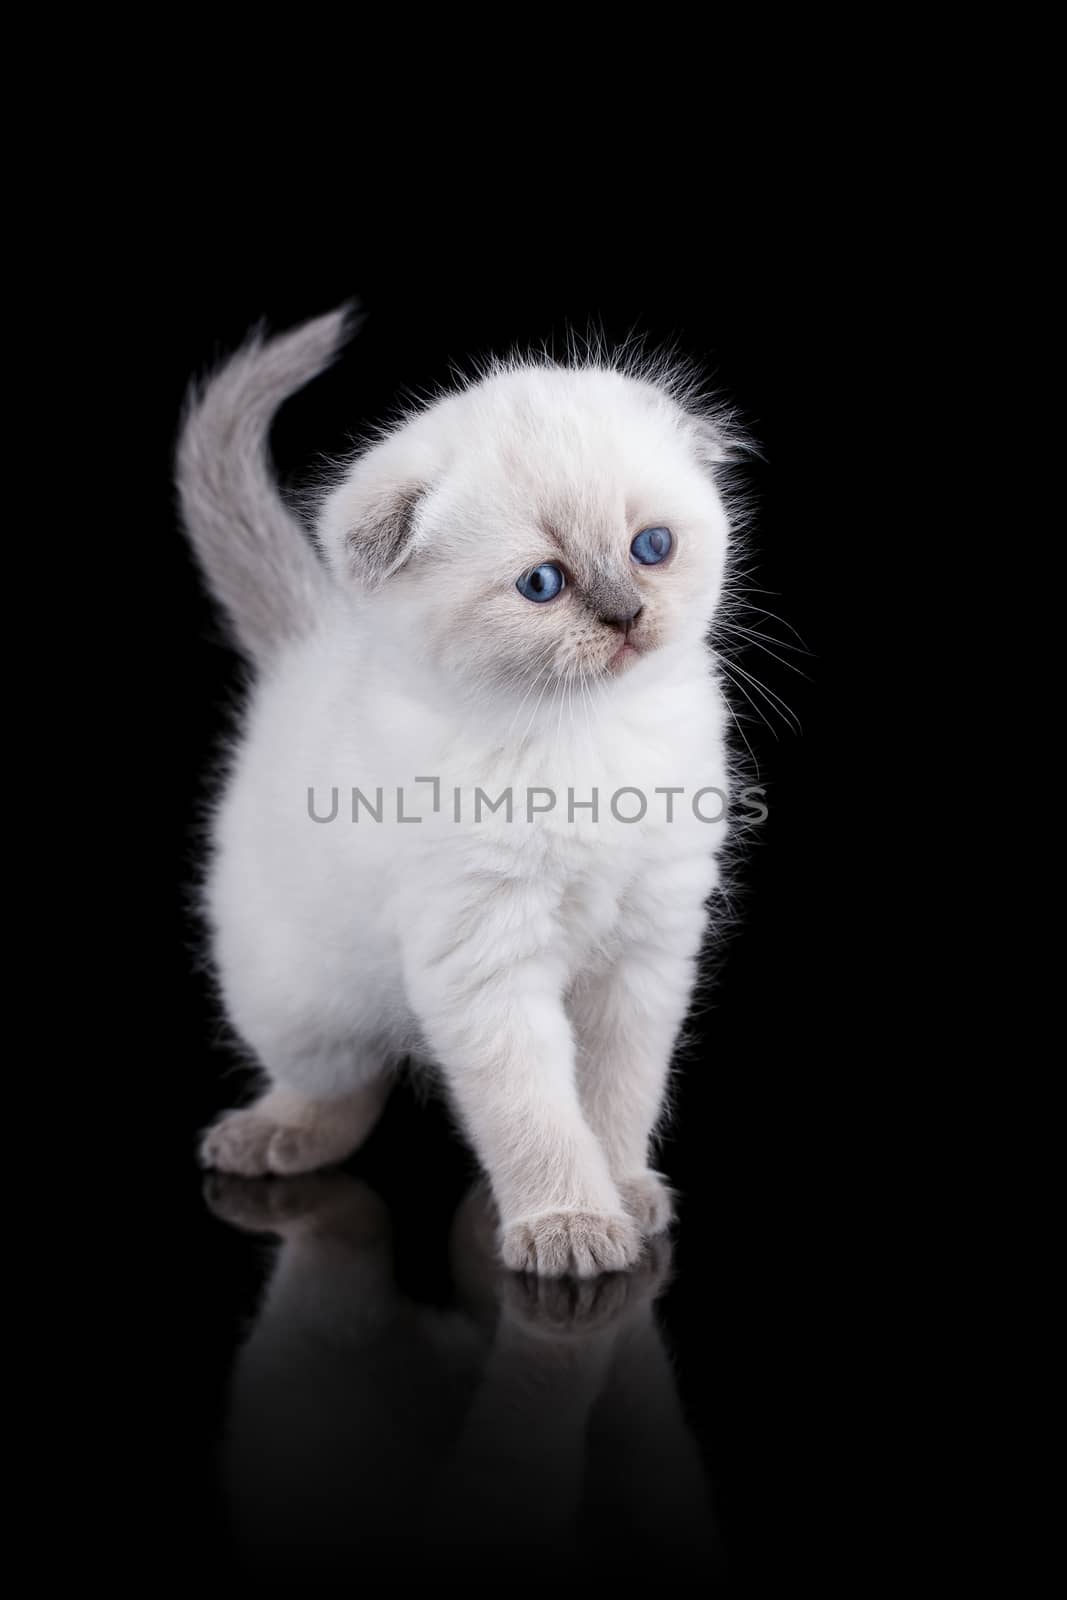 Lop-eared kitten on a magnificent black background.